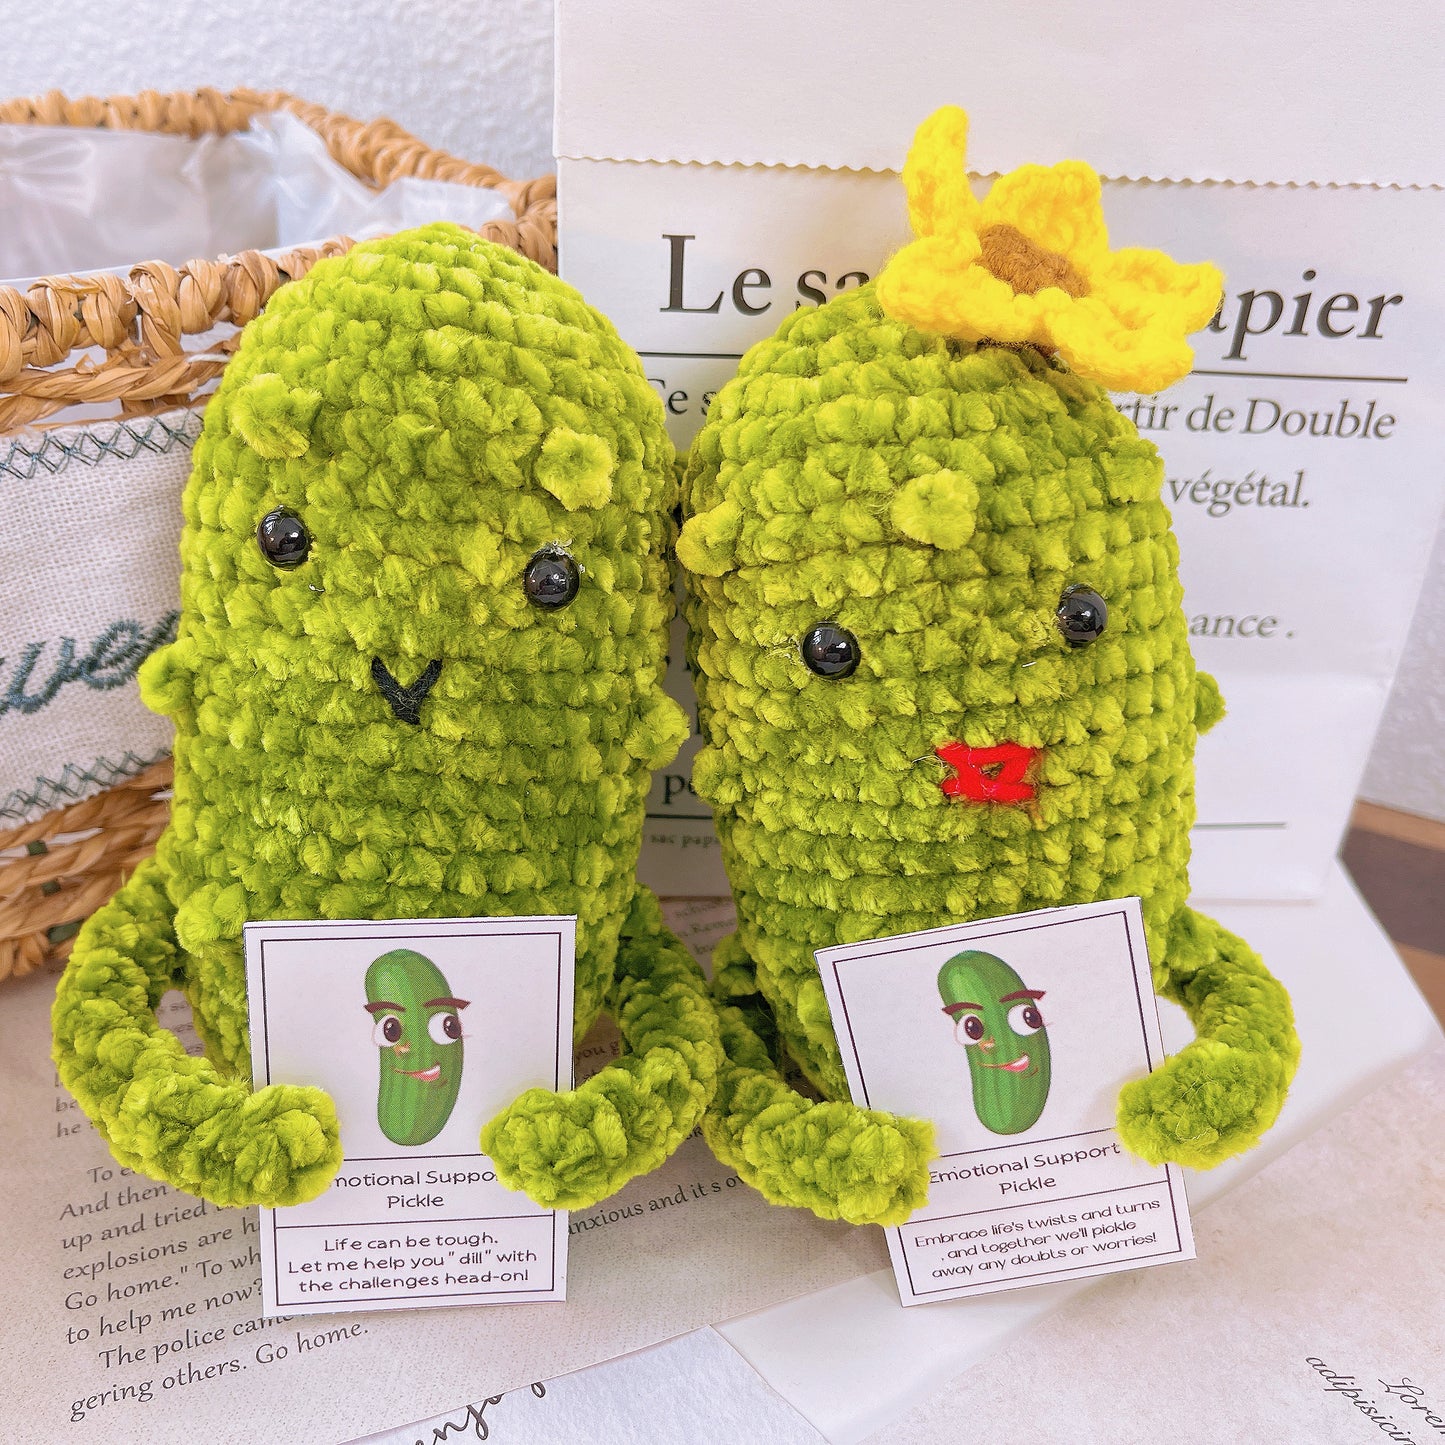 Handmade Custom Text Crochet Pickle Bundle Gift Set for Couples and Friends (Personalized Text Available)